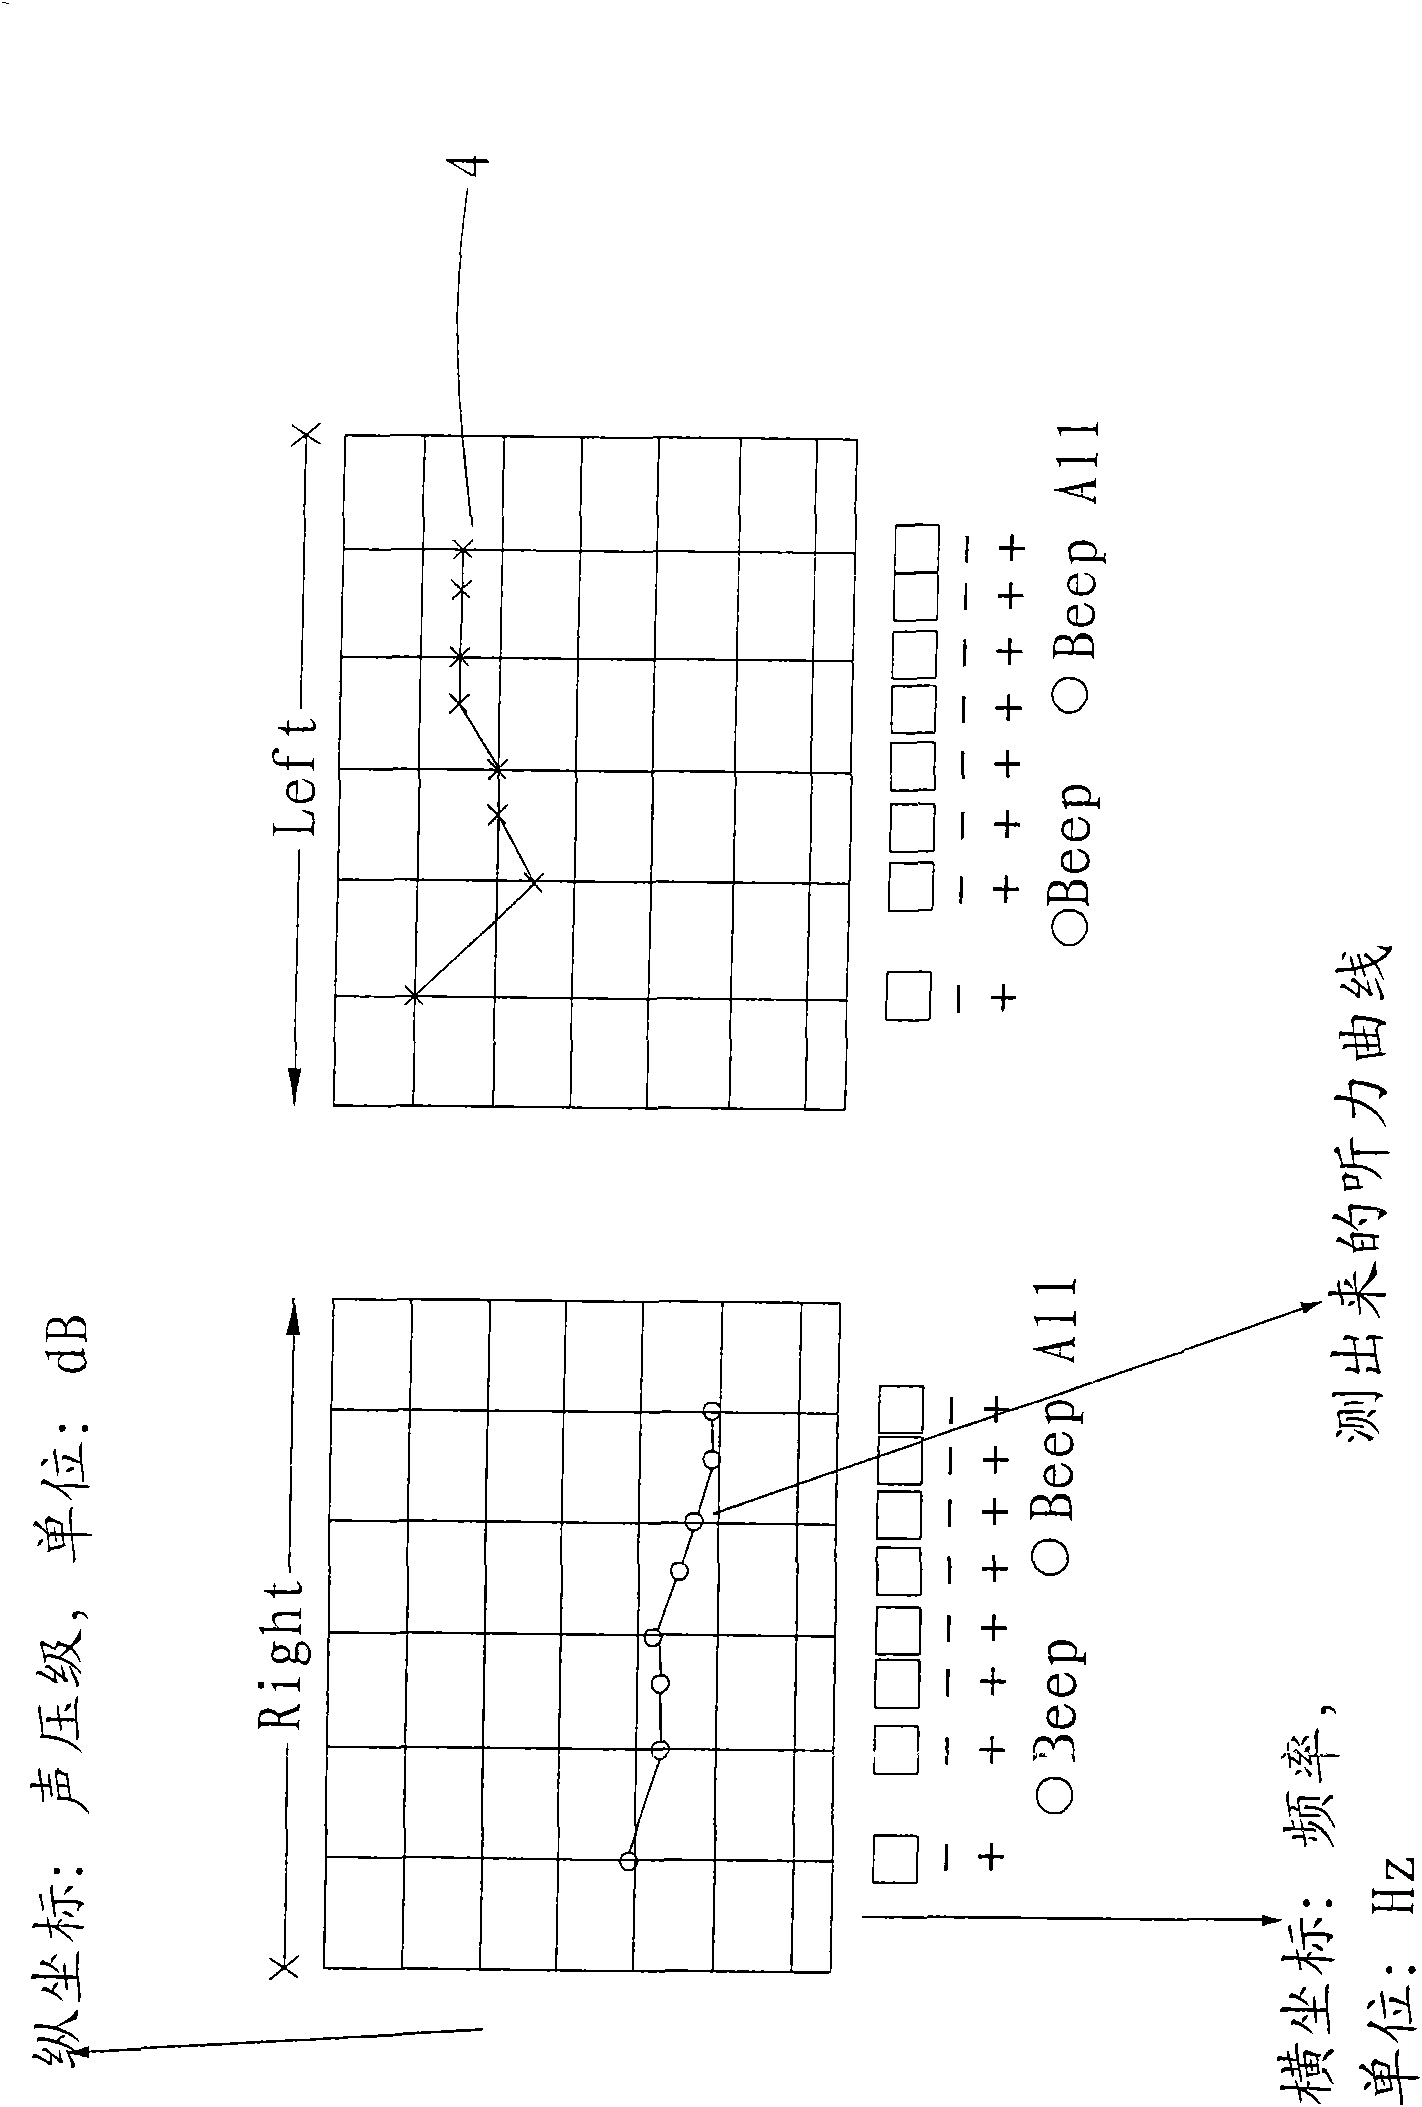 Method for automatically debugging audiphones